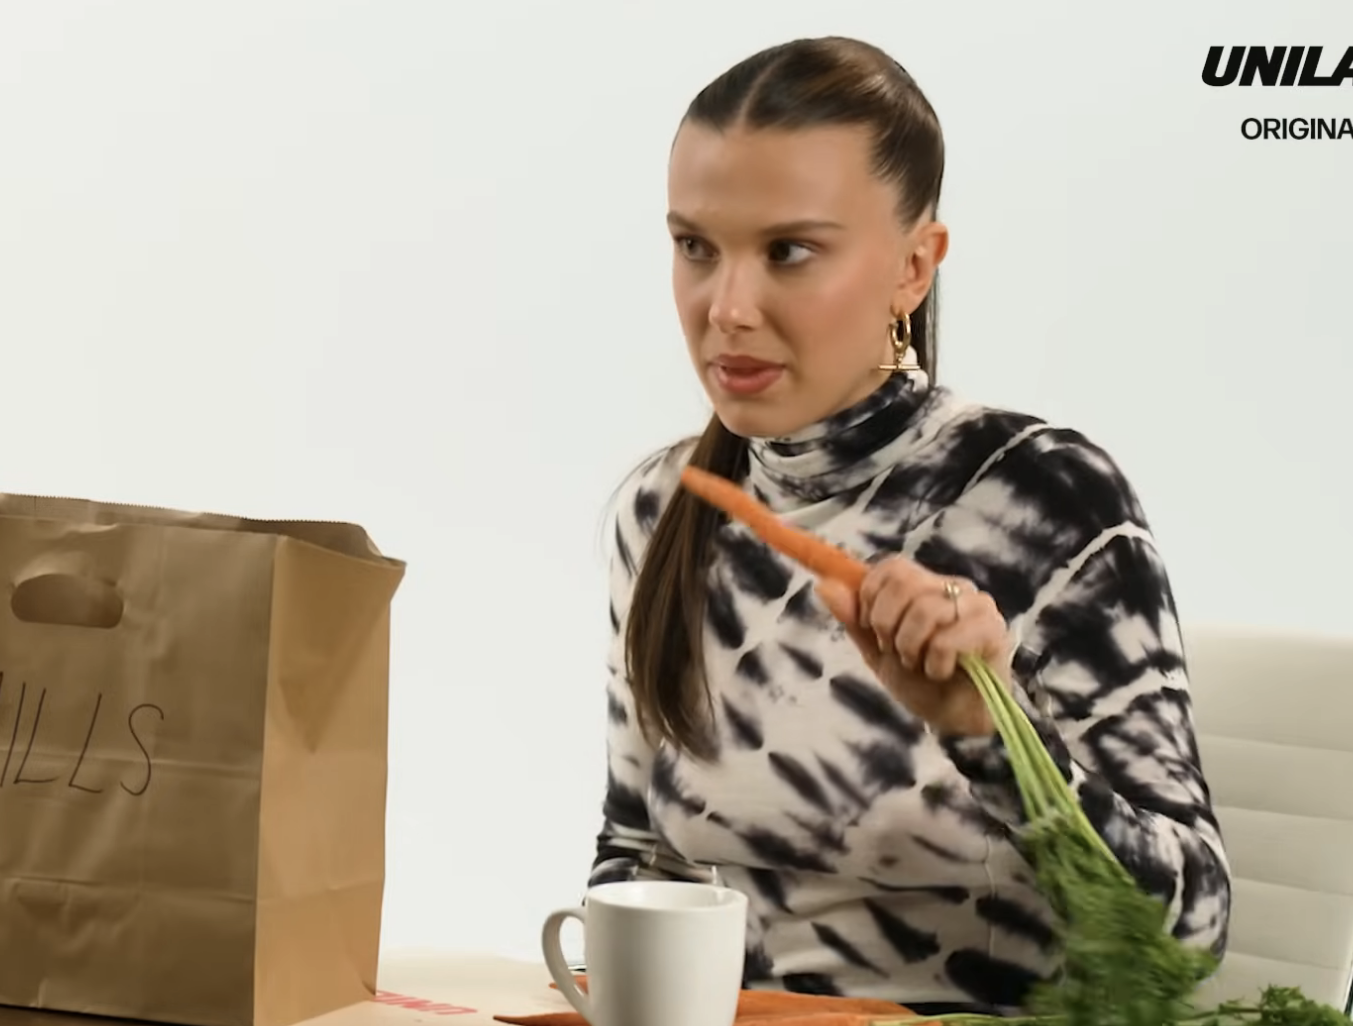 Millie Bobby Brown in a still from a video interview, is seated and holding a carrot with the long stem still attached. On the table in front of her is a paper bag and a mug